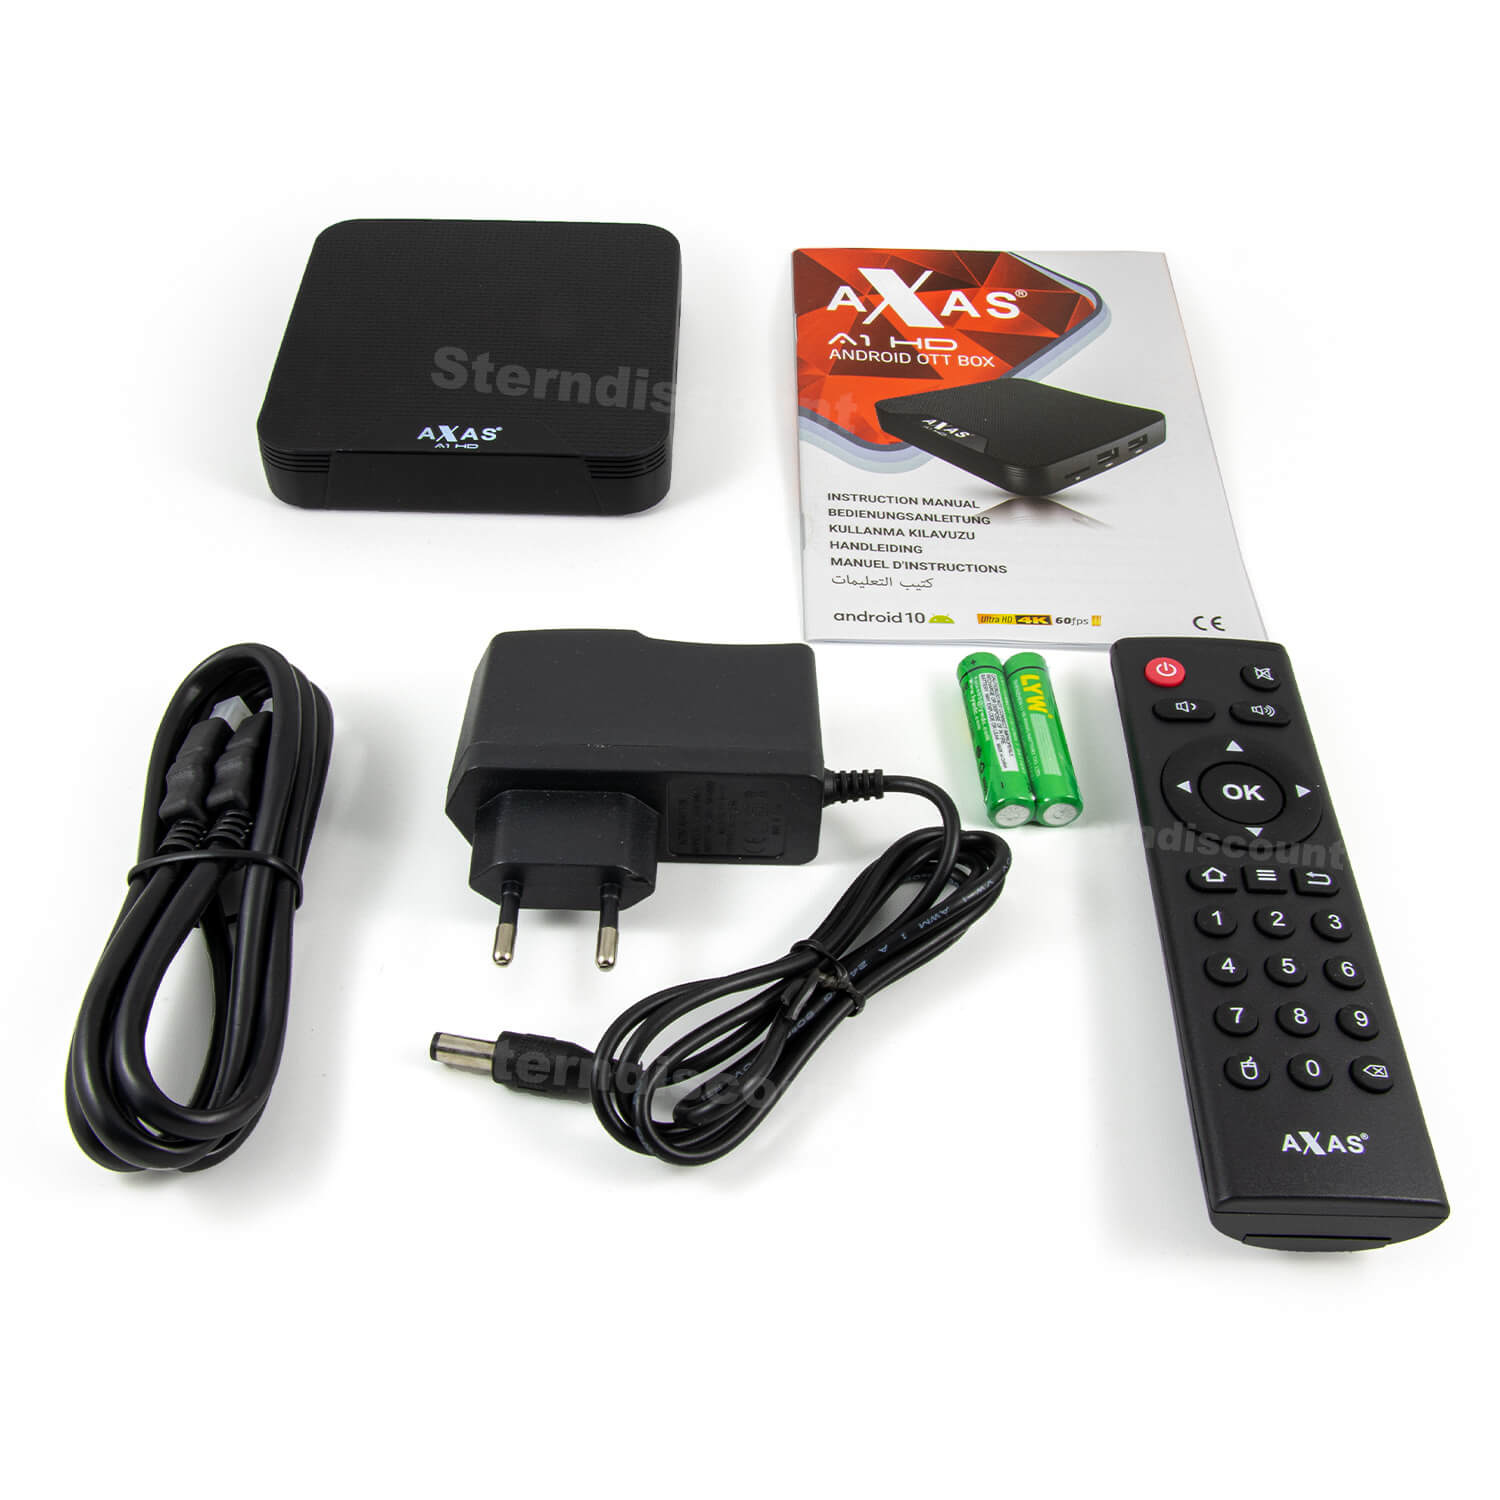 Axas A1 HD android IPTV Ott Box-Lieferumfang